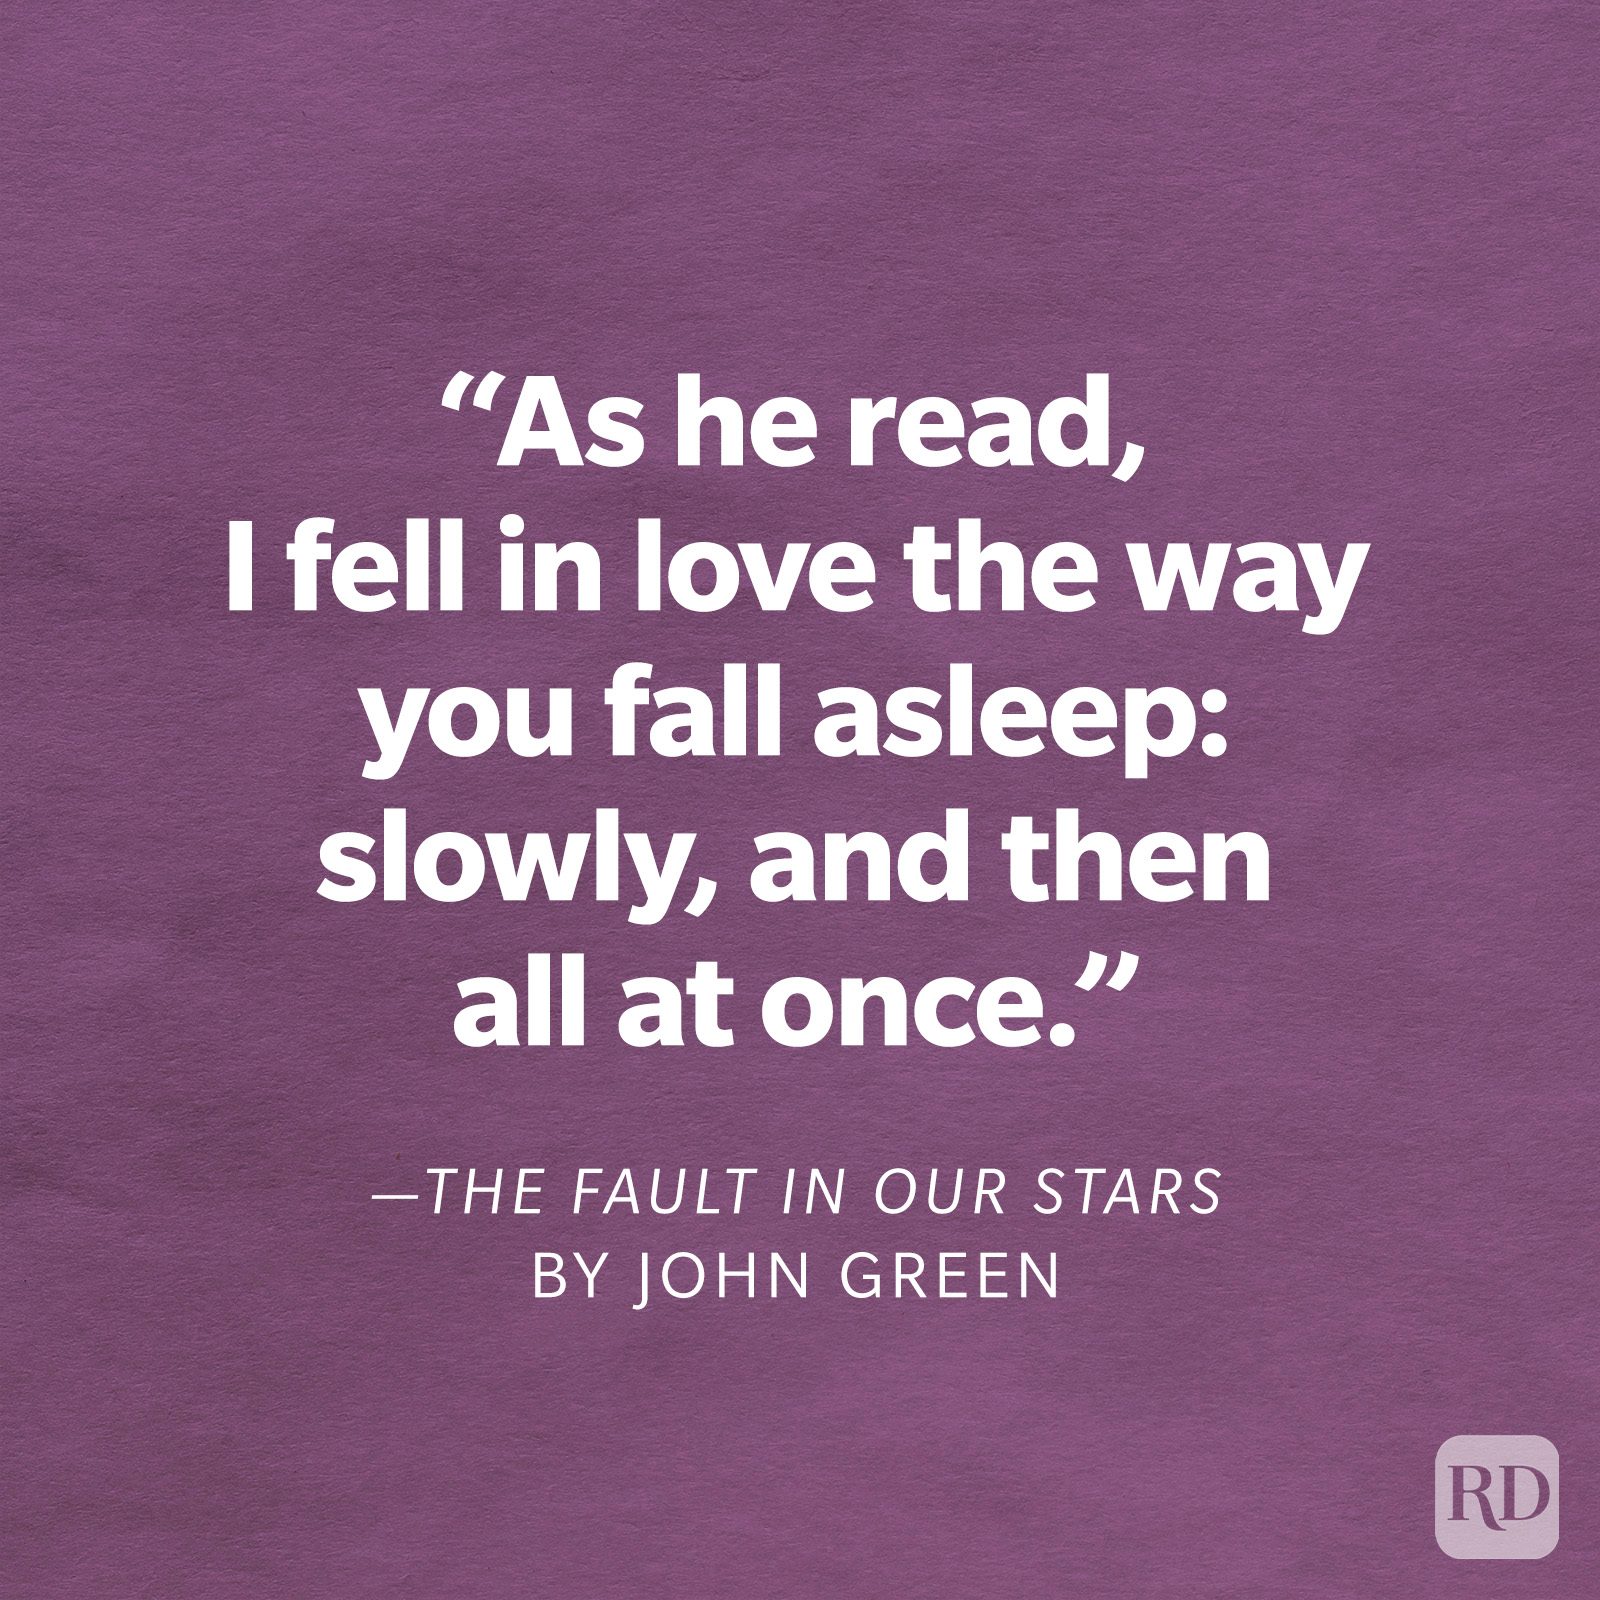 Readers' favorite quotes from 's best-selling books of all time